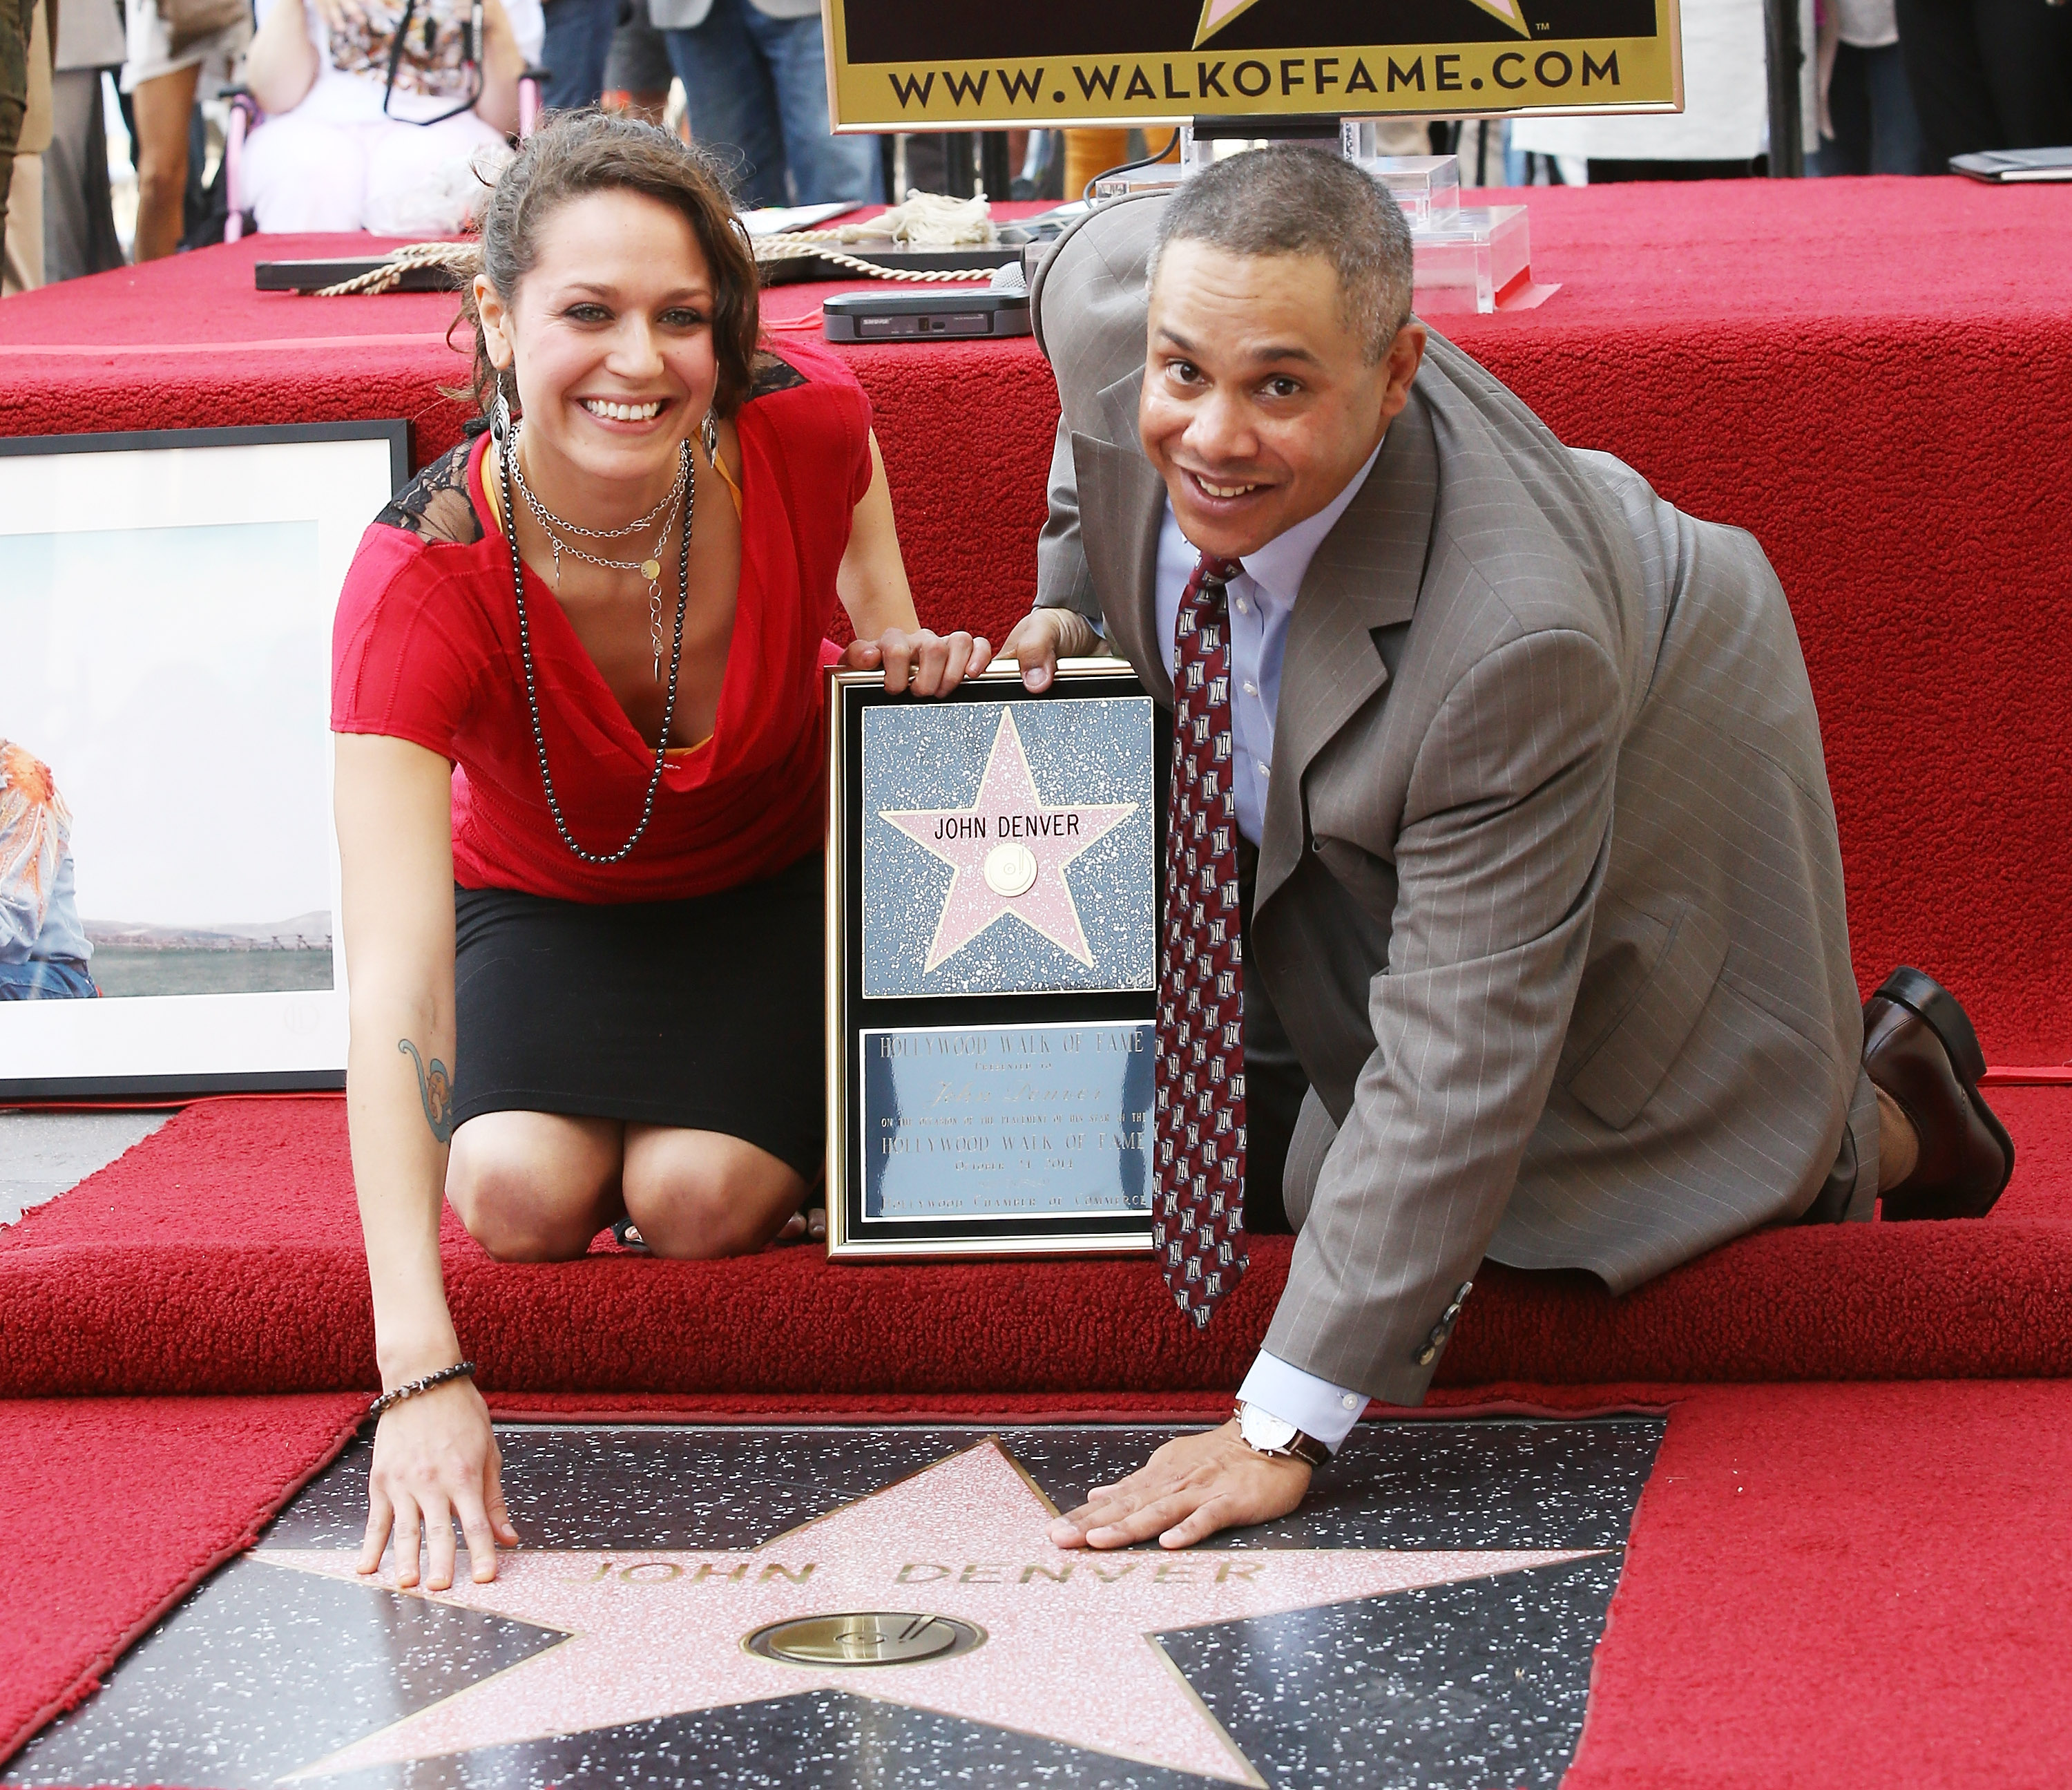 Jesse Belle Deutschendorf and Zachary John Denver, John Denver's children attend the ceremony honoring their father, John Denver with a Star on The Hollywood Walk of Fame held on October 24, 2014, in Hollywood, California. | Source: Getty Images